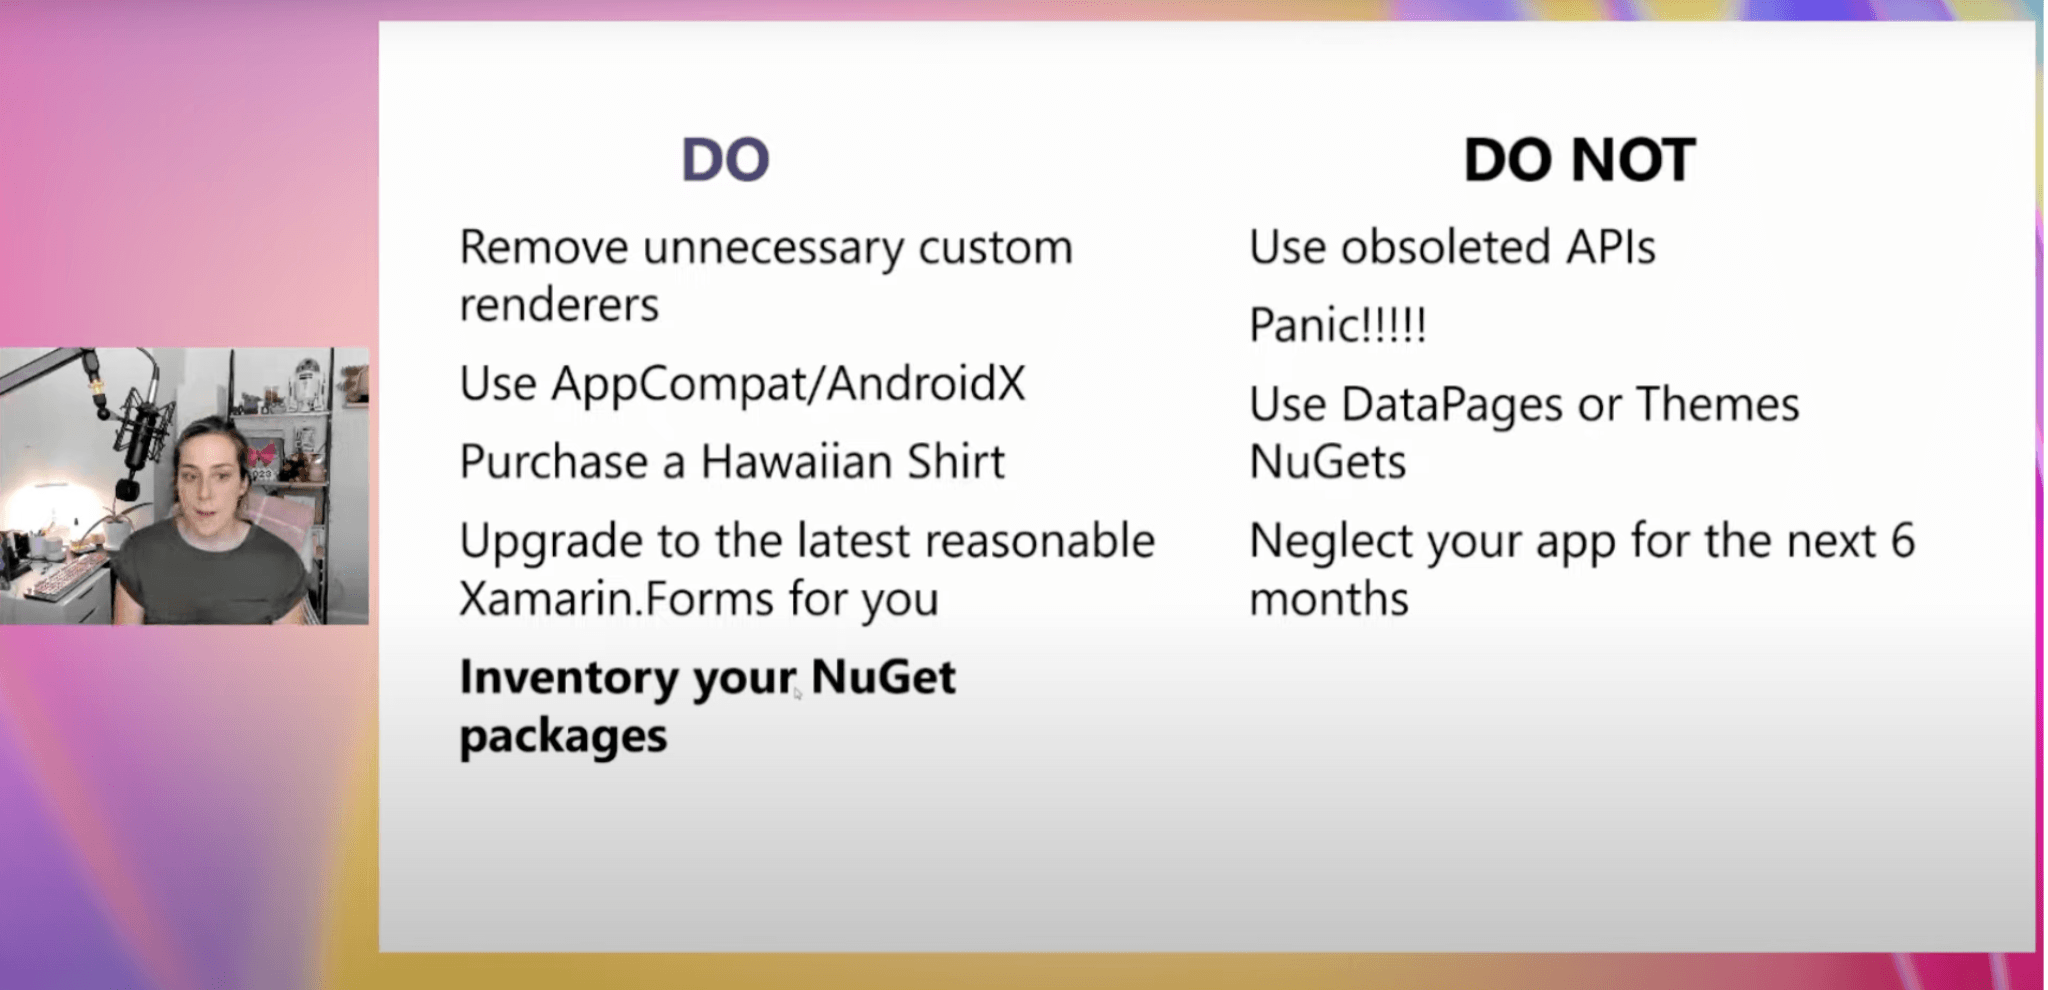 Do: remove unnecessary custom renders, use app compat/ AndroidX, purchase a Hawaiian shirt, upgrade to the latest reasonable xamarin forms for you, inventory your nuget packages. Do not: use obsolete APIs, panic, use data packages or themes Nugets, neglect your app for the next 6 months.